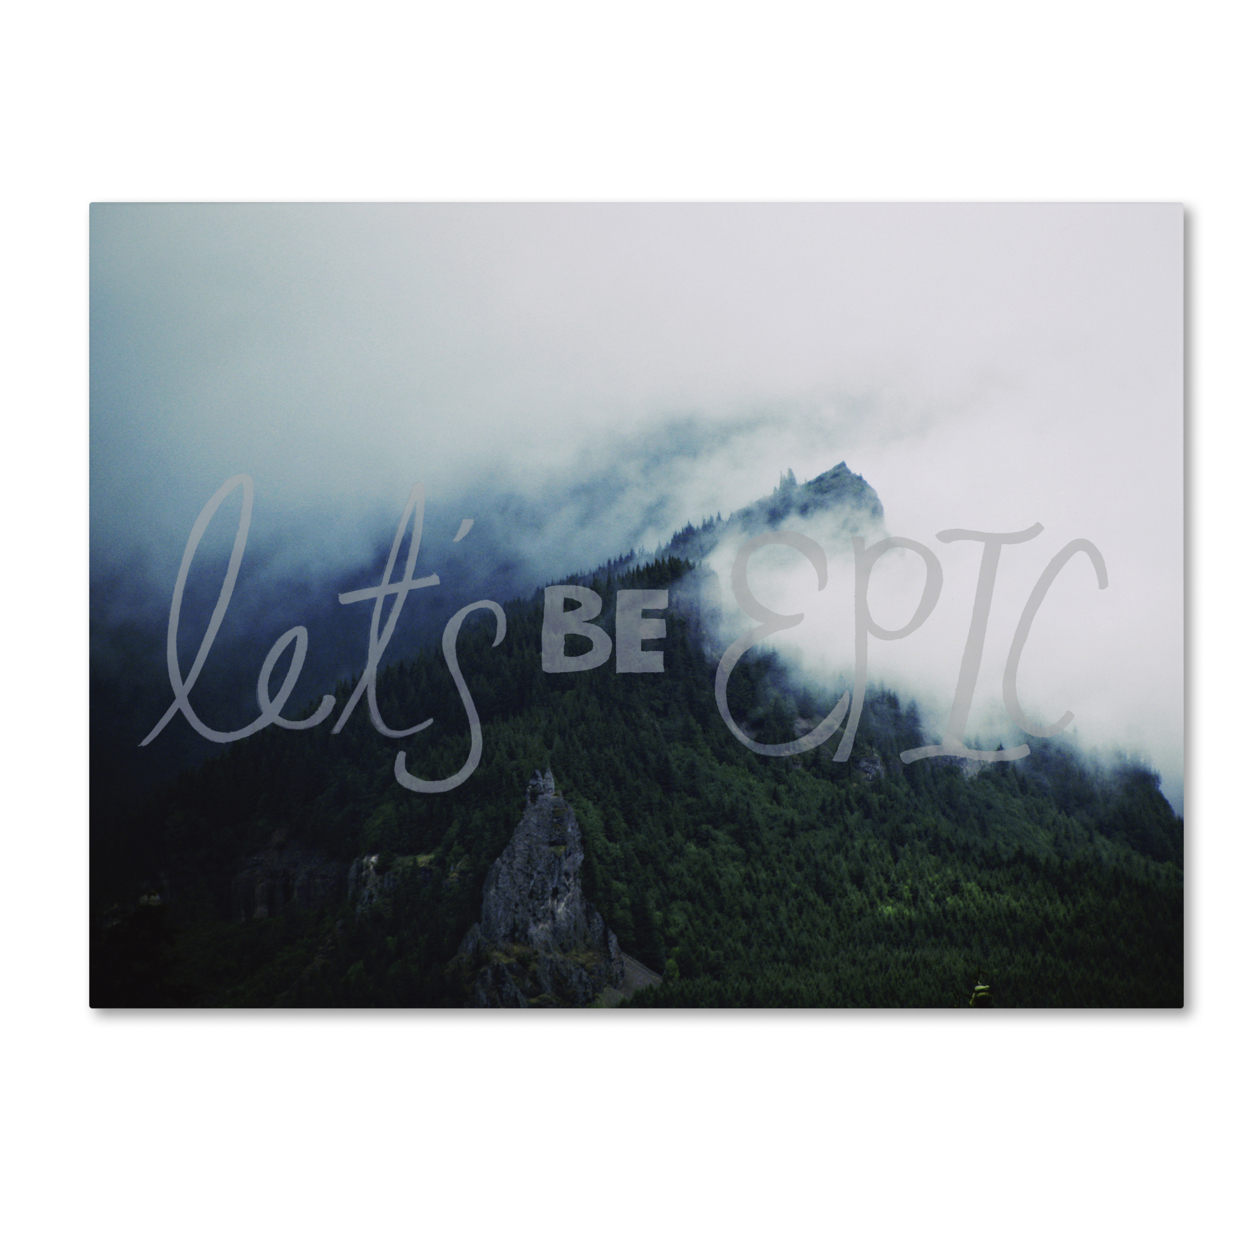 Leah Flores 'Let's Be Epic' Canvas Wall Art 35 X 47 Inches